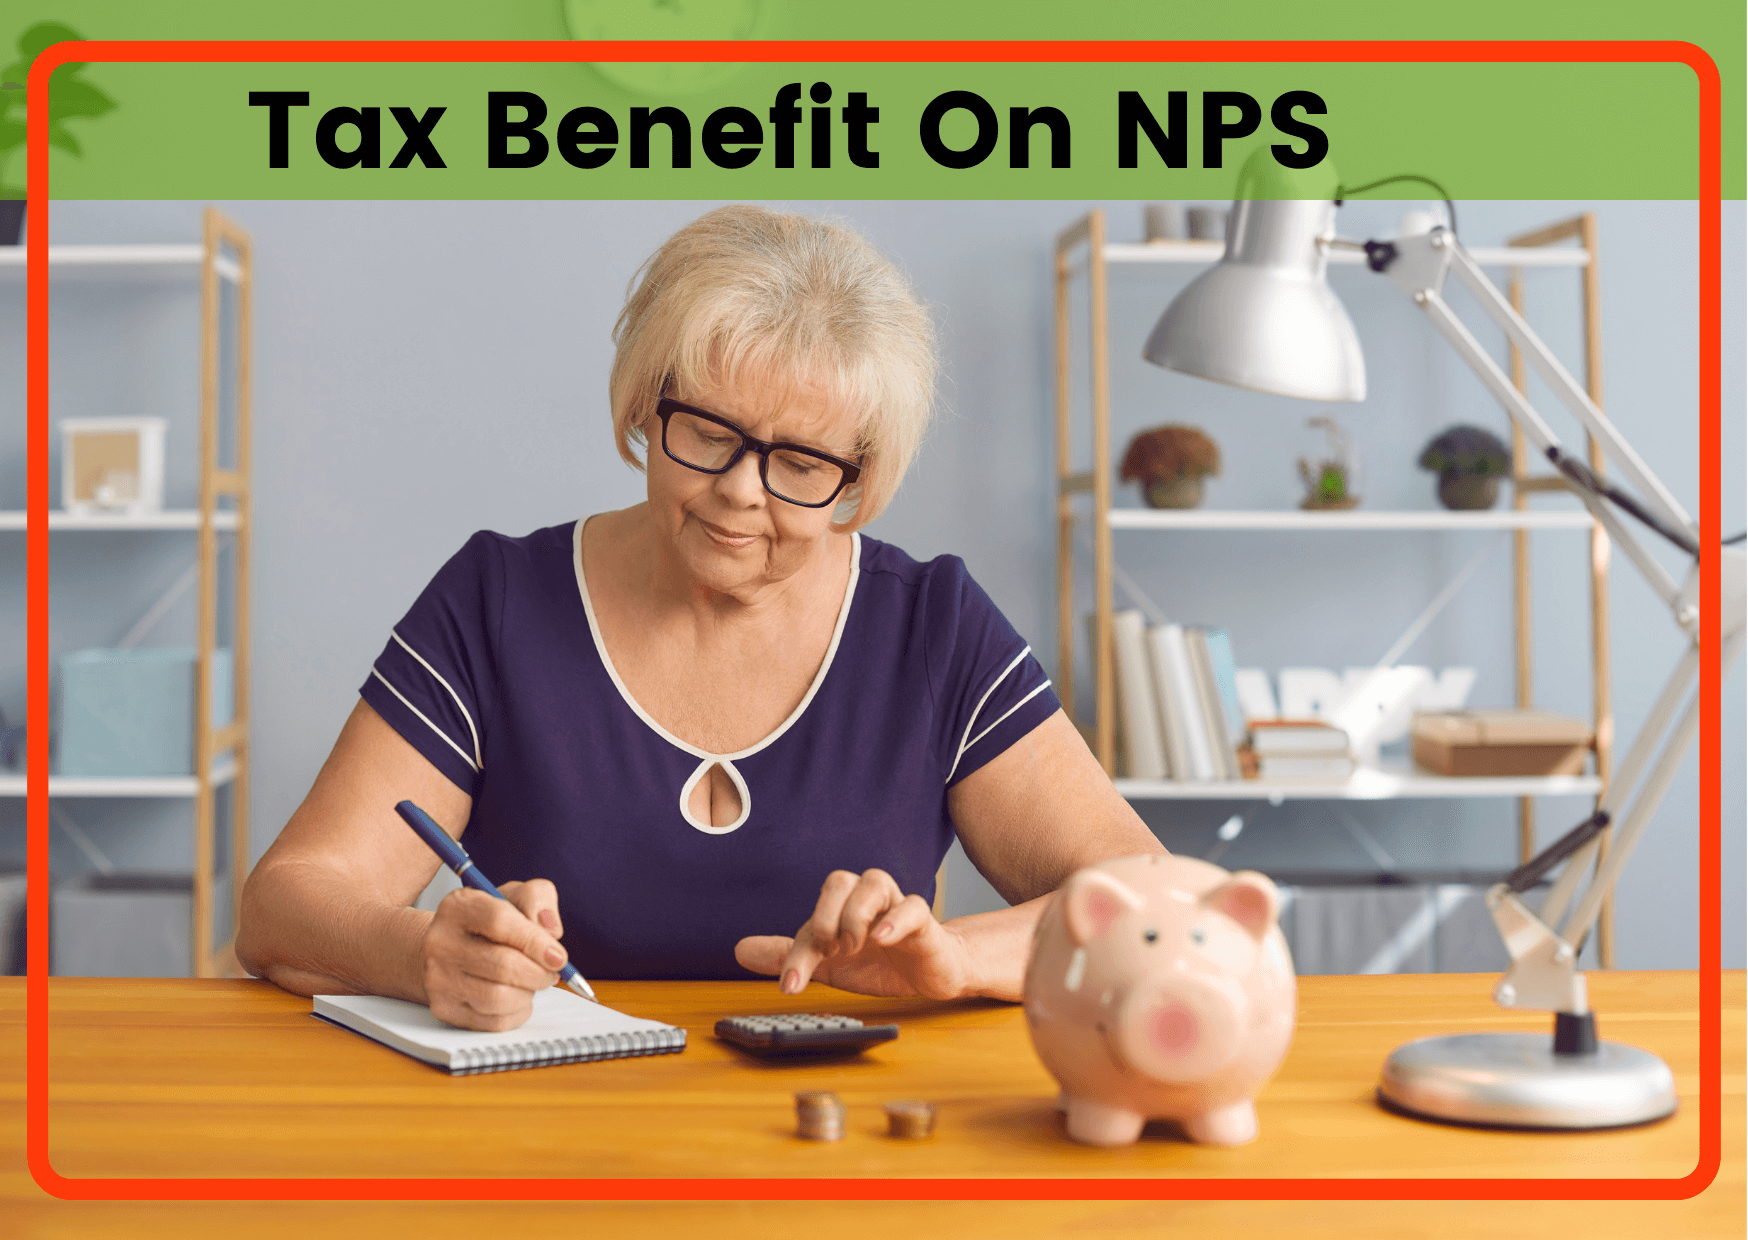 Nps Corporate Account Tax Benefit